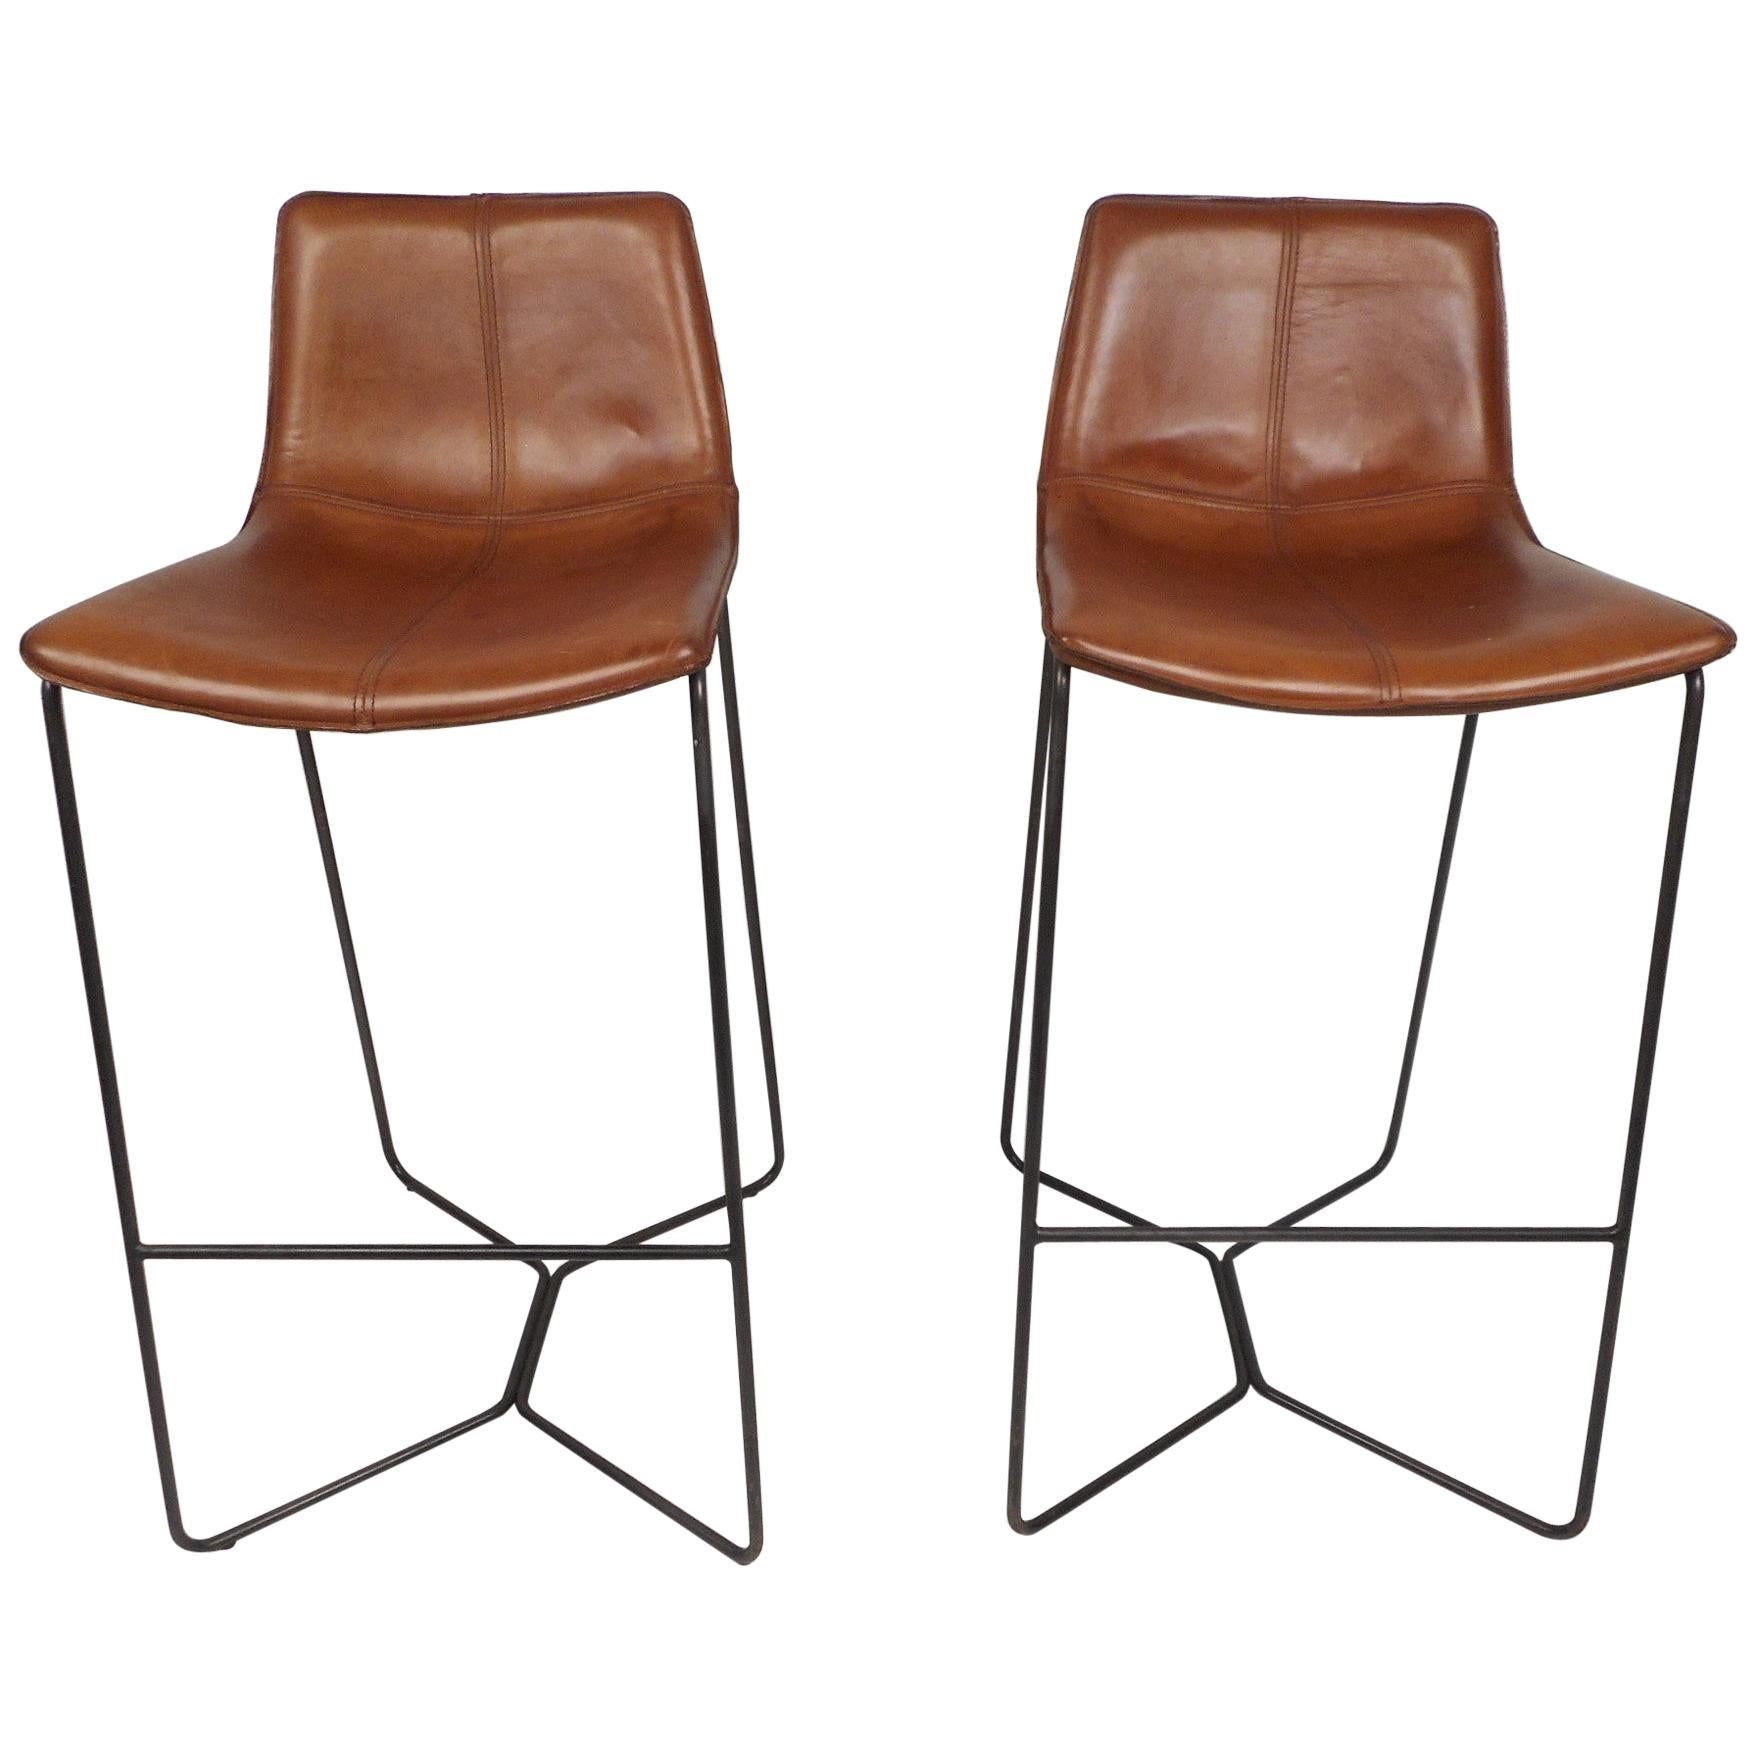 Pair of Mid-Century Modern Stools with Leather Upholstery